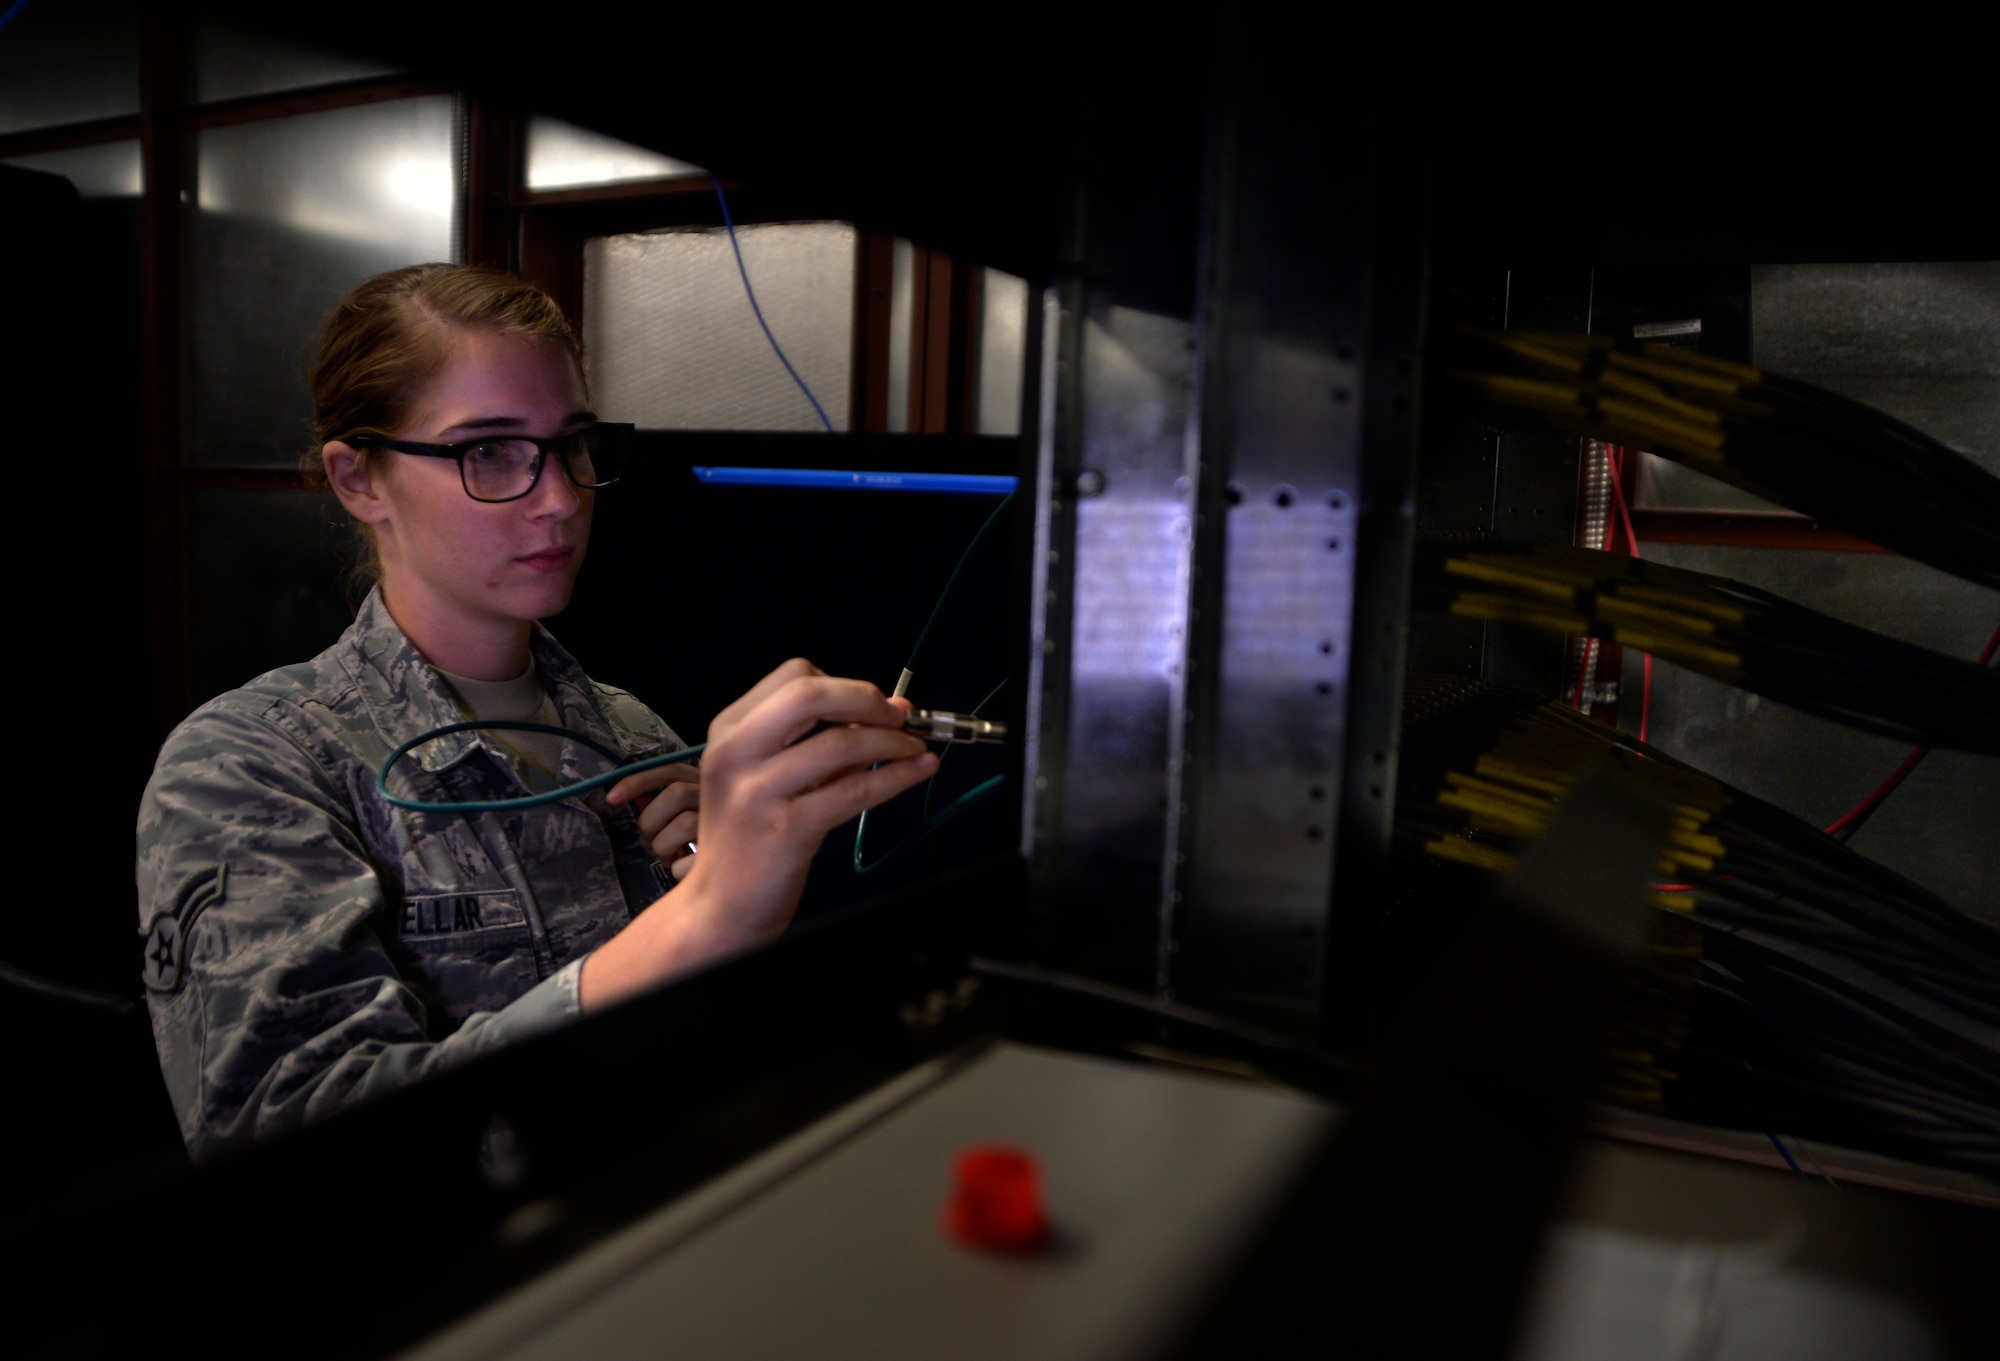 Airman 1st Class Ashley Kellar, 432nd Aircraft Communications Maintenance Squadron radio frequencies technician, patches in a ground control station for satellite link Aug. 19, 2015, at Creech Air Force Base, Nevada. The 432nd ACMS is the only unit in the Air Force dedicated to maintaining the communications network of the remotely piloted aircraft enterprise. (U.S. Air Force photo by Airman 1st Class Christian Clausen/Released)